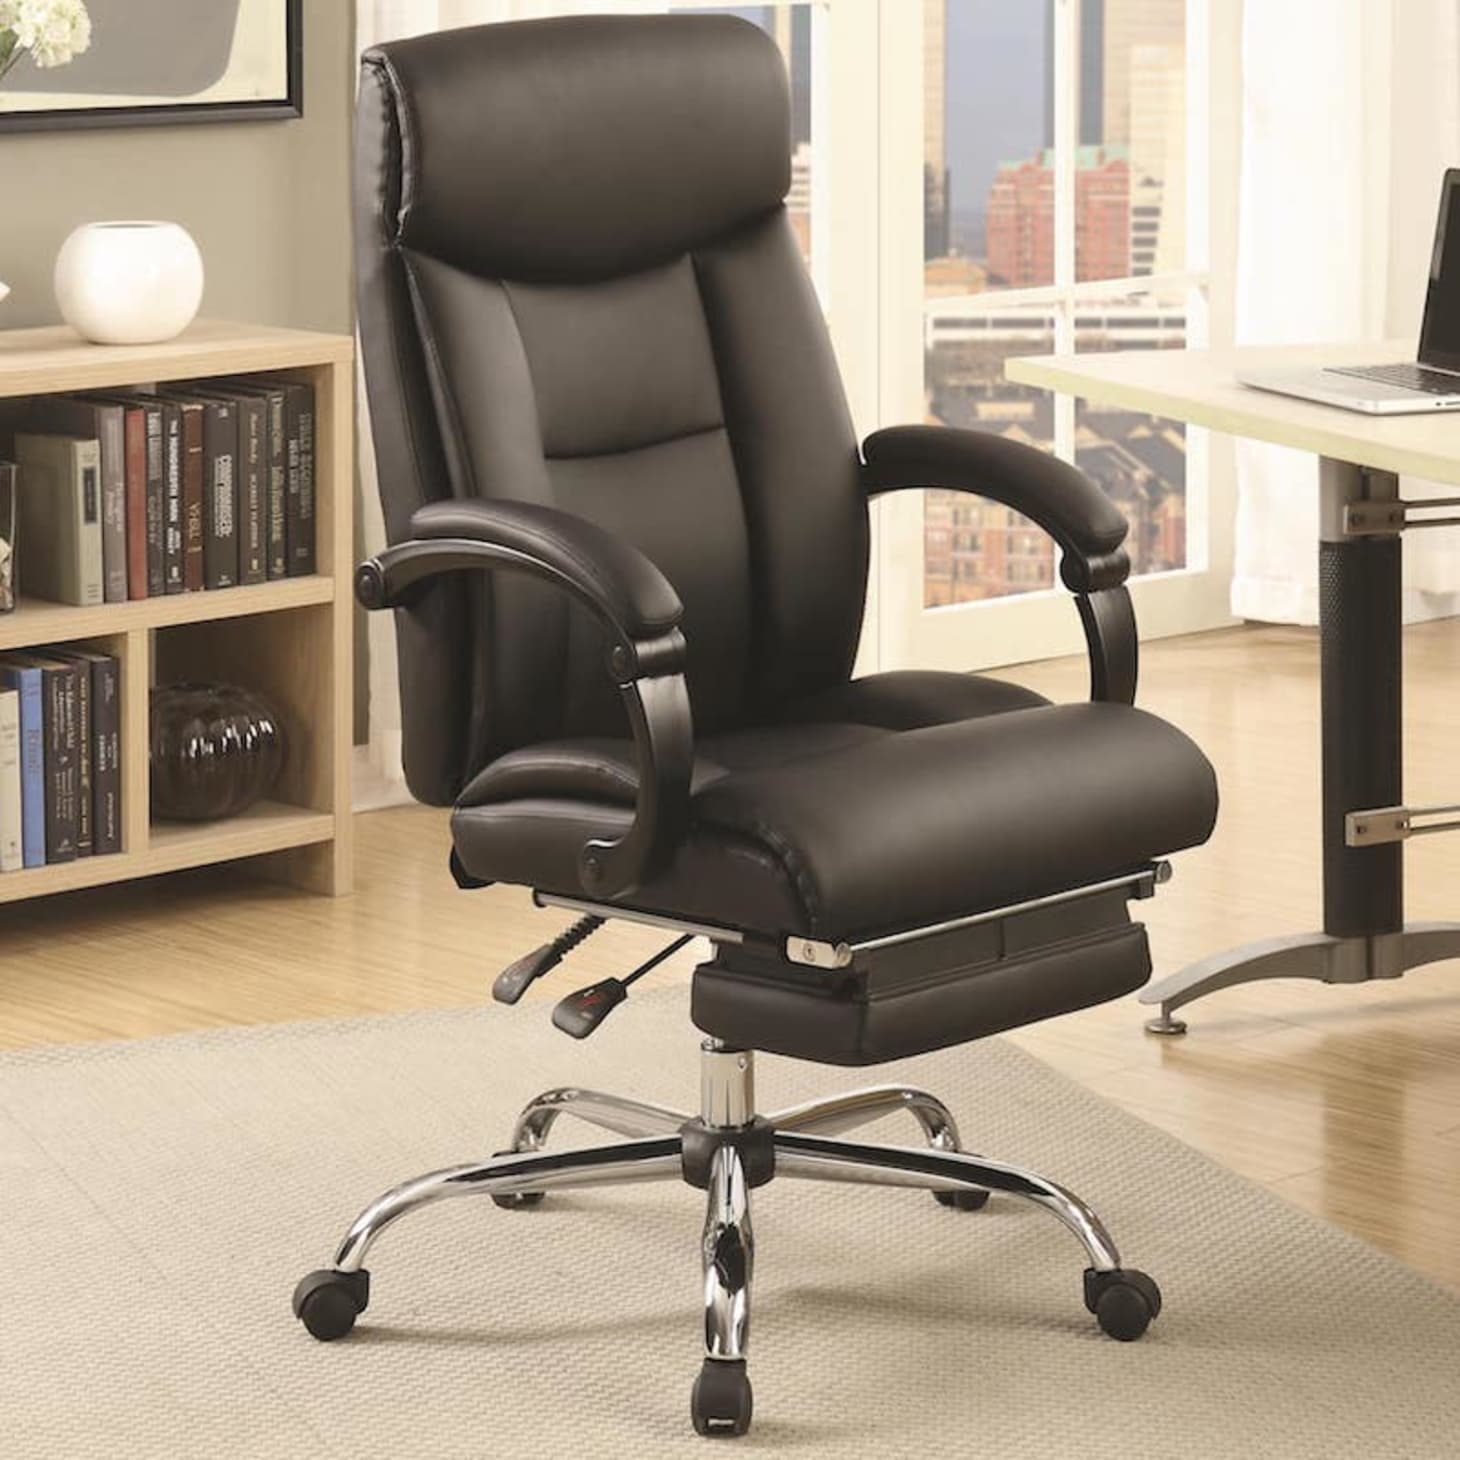 This Office Chair Will Let You Take A Comfortable Nap At Work